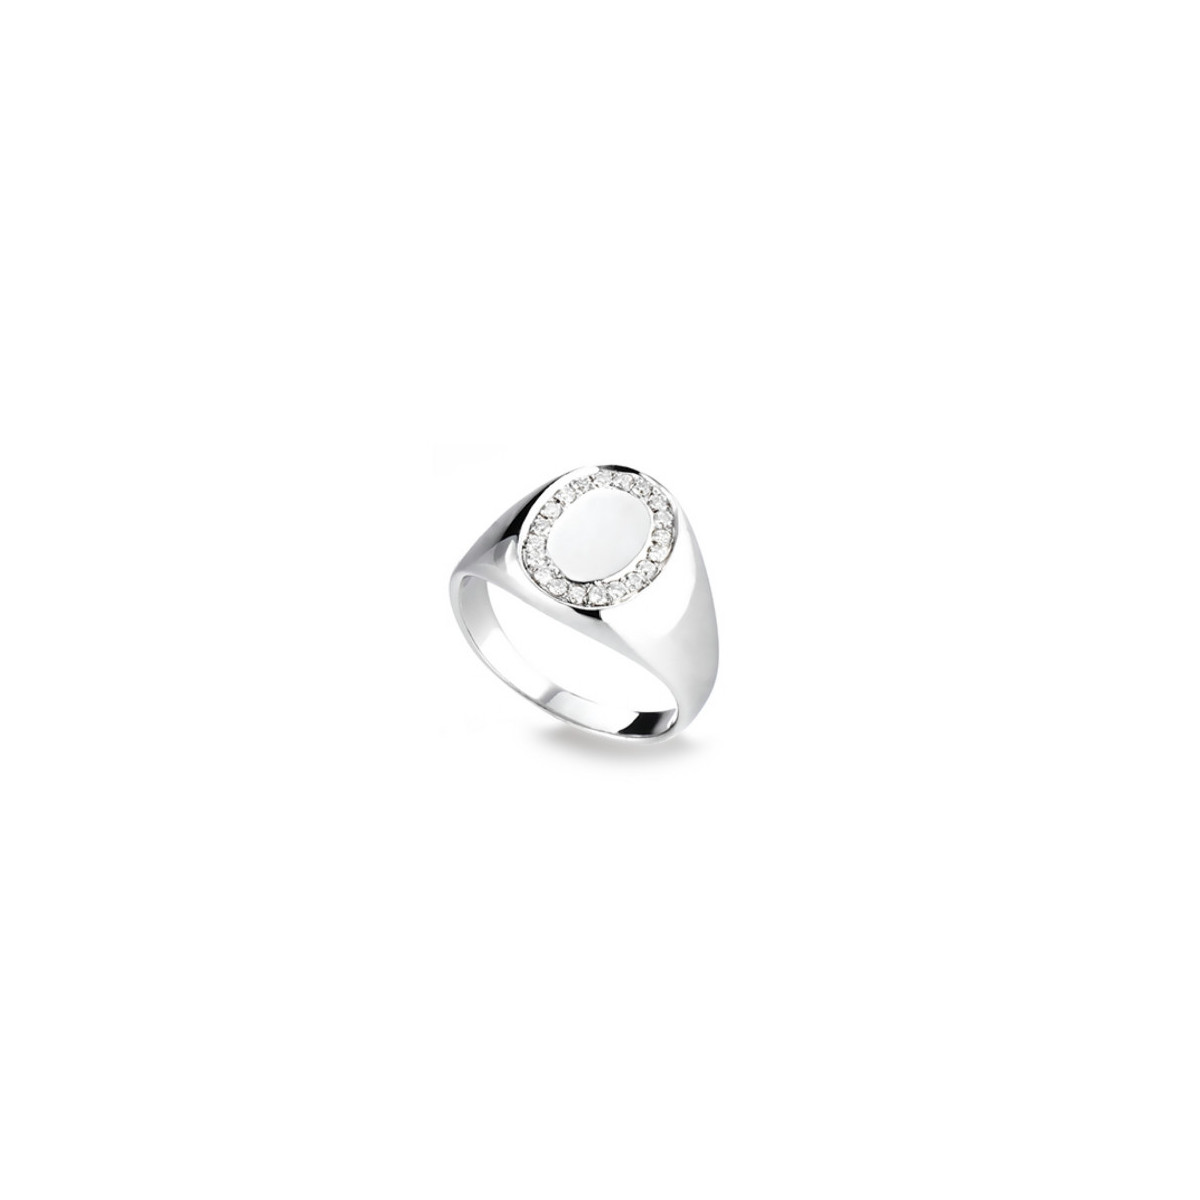 SILVER OVAL SIGNET RING